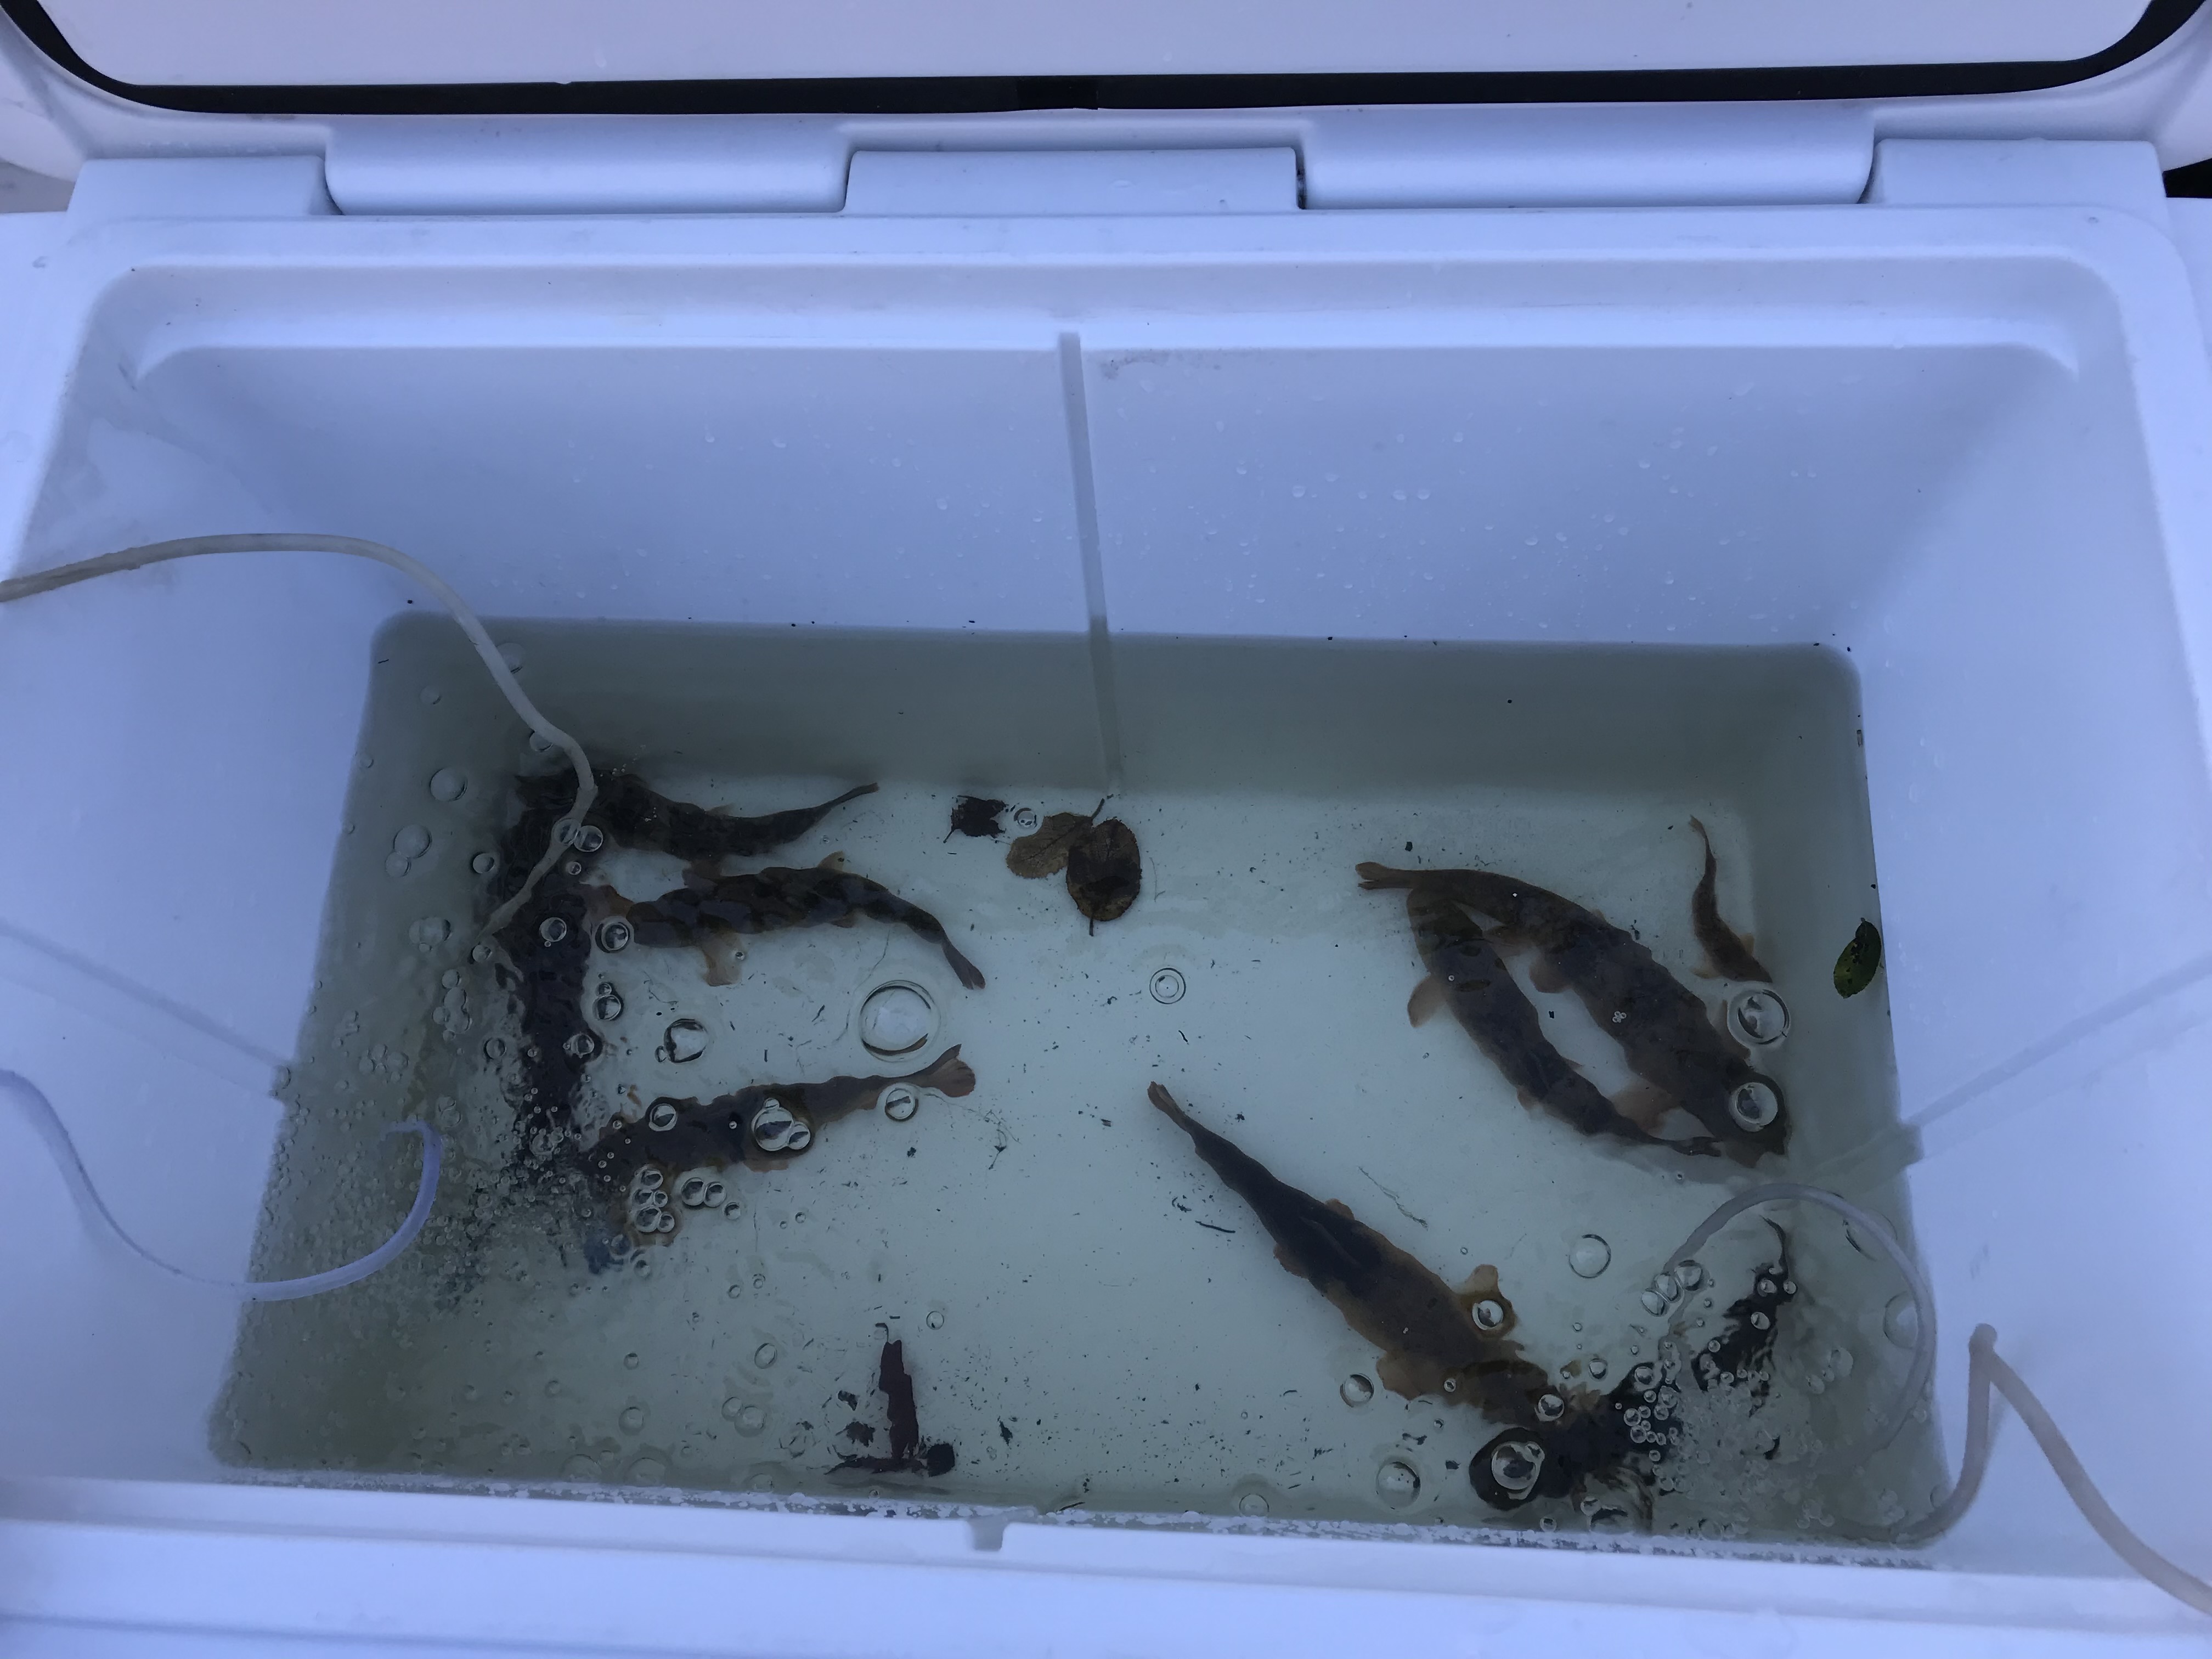 Santa Ana Suckers in a cooler with aerators in the water.